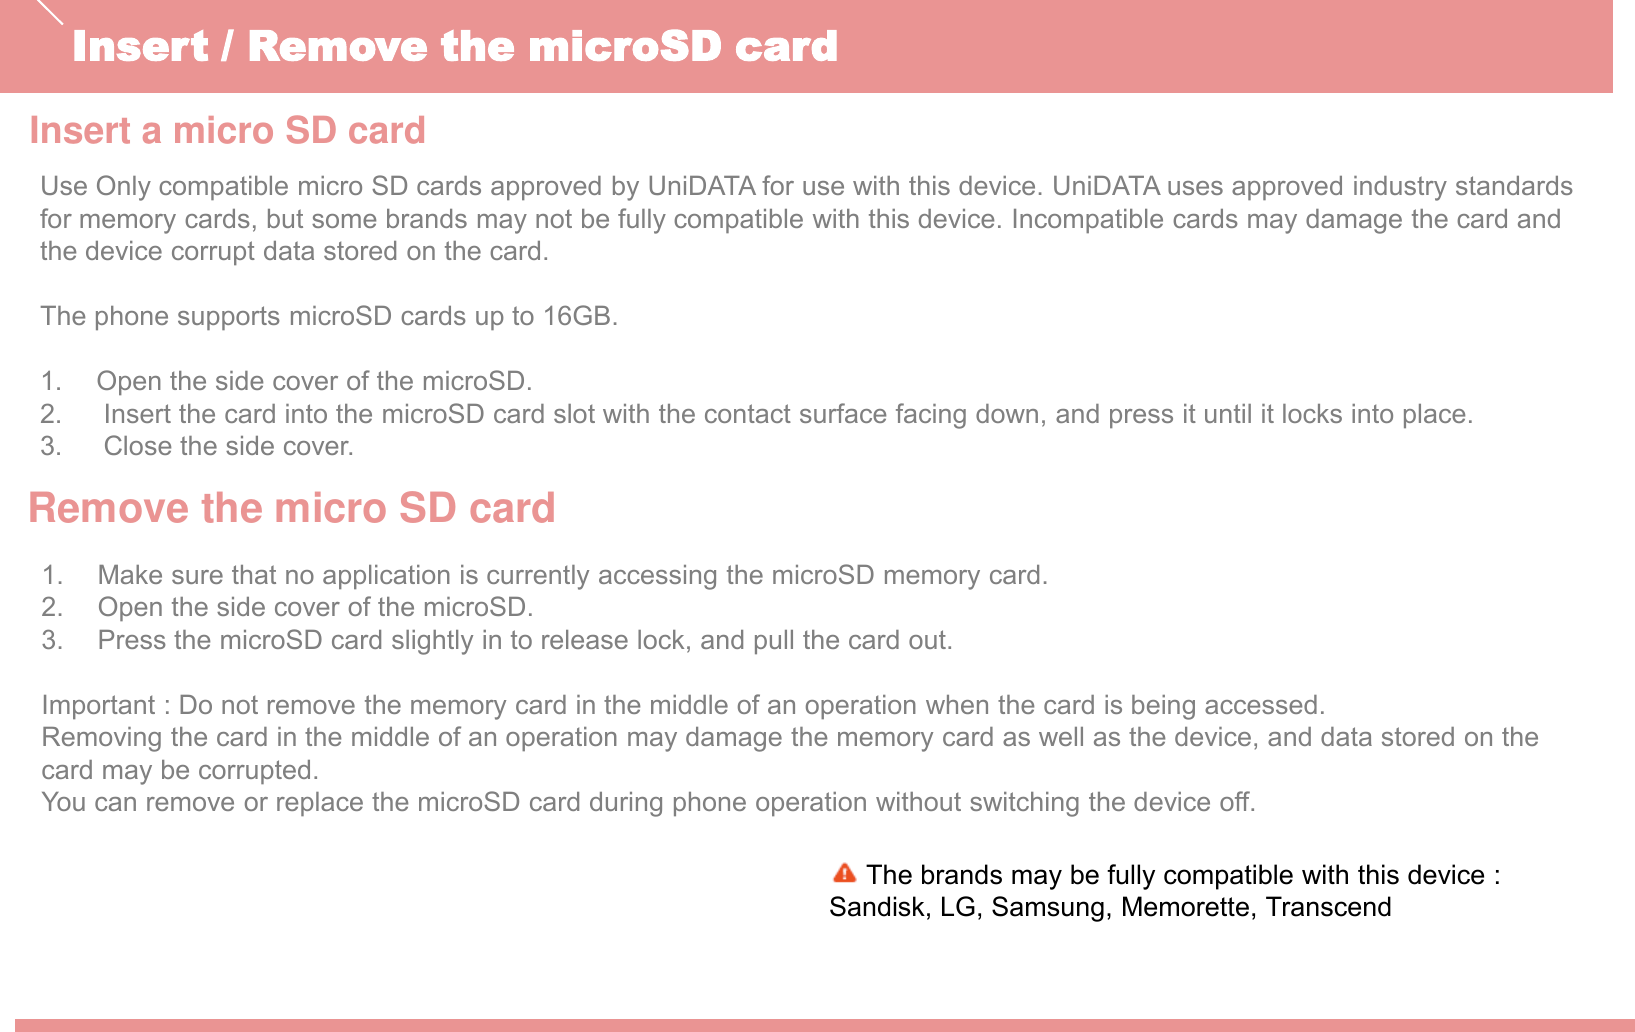 Insert a micro SD cardInsert / Remove the microSD cardThe brands may be fully compatible with this device :Sandisk, LG, Samsung, Memorette, Transcend Use Only compatible micro SD cards approved by UniDATA for use with this device. UniDATA uses approved industry standards for memory cards, but some brands may not be fully compatible with this device. Incompatible cards may damage the card and the device corrupt data stored on the card.The phone supports microSD cards up to 16GB.1. Open the side cover of the microSD.2. Insert the card into the microSD card slot with the contact surface facing down, and press it until it locks into place.3. Close the side cover. Remove the micro SD card1. Make sure that no application is currently accessing the microSD memory card.2. Open the side cover of the microSD.3. Press the microSD card slightly in to release lock, and pull the card out.Important : Do not remove the memory card in the middle of an operation when the card is being accessed. Removing the card in the middle of an operation may damage the memory card as well as the device, and data stored on thecard may be corrupted. You can remove or replace the microSD card during phone operation without switching the device off.